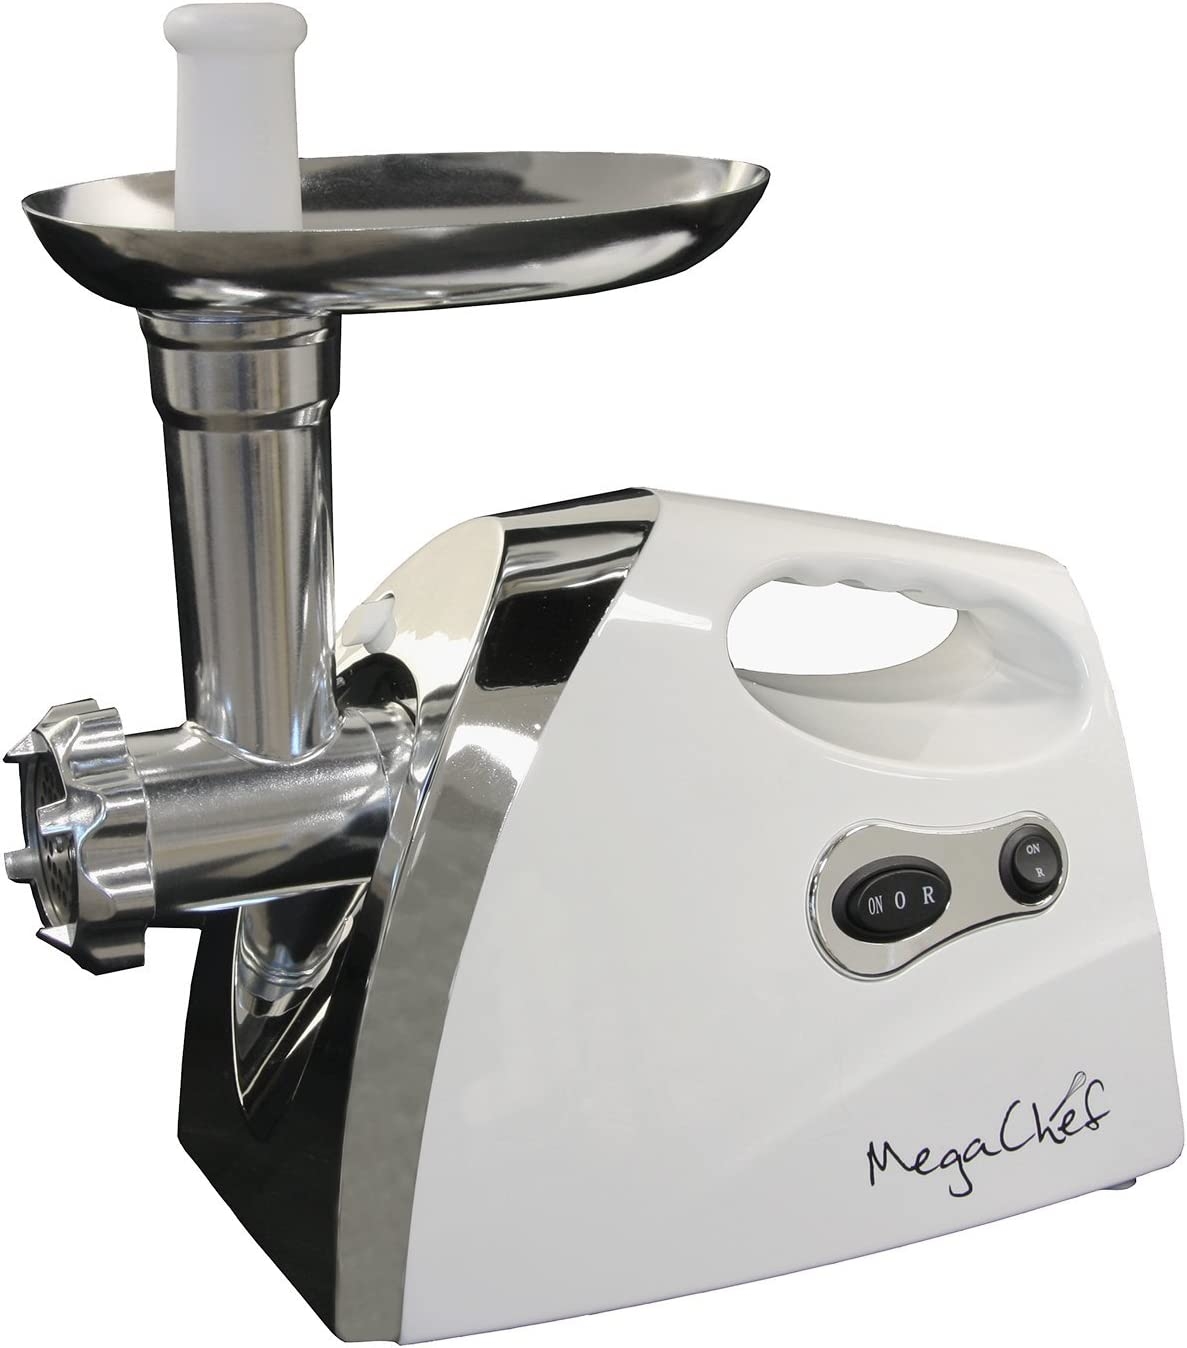 Megachef 1200 Watt Powerful Automatic Meat Grinder for Household Use, white (MG-650) Import To Shop ×Product customization